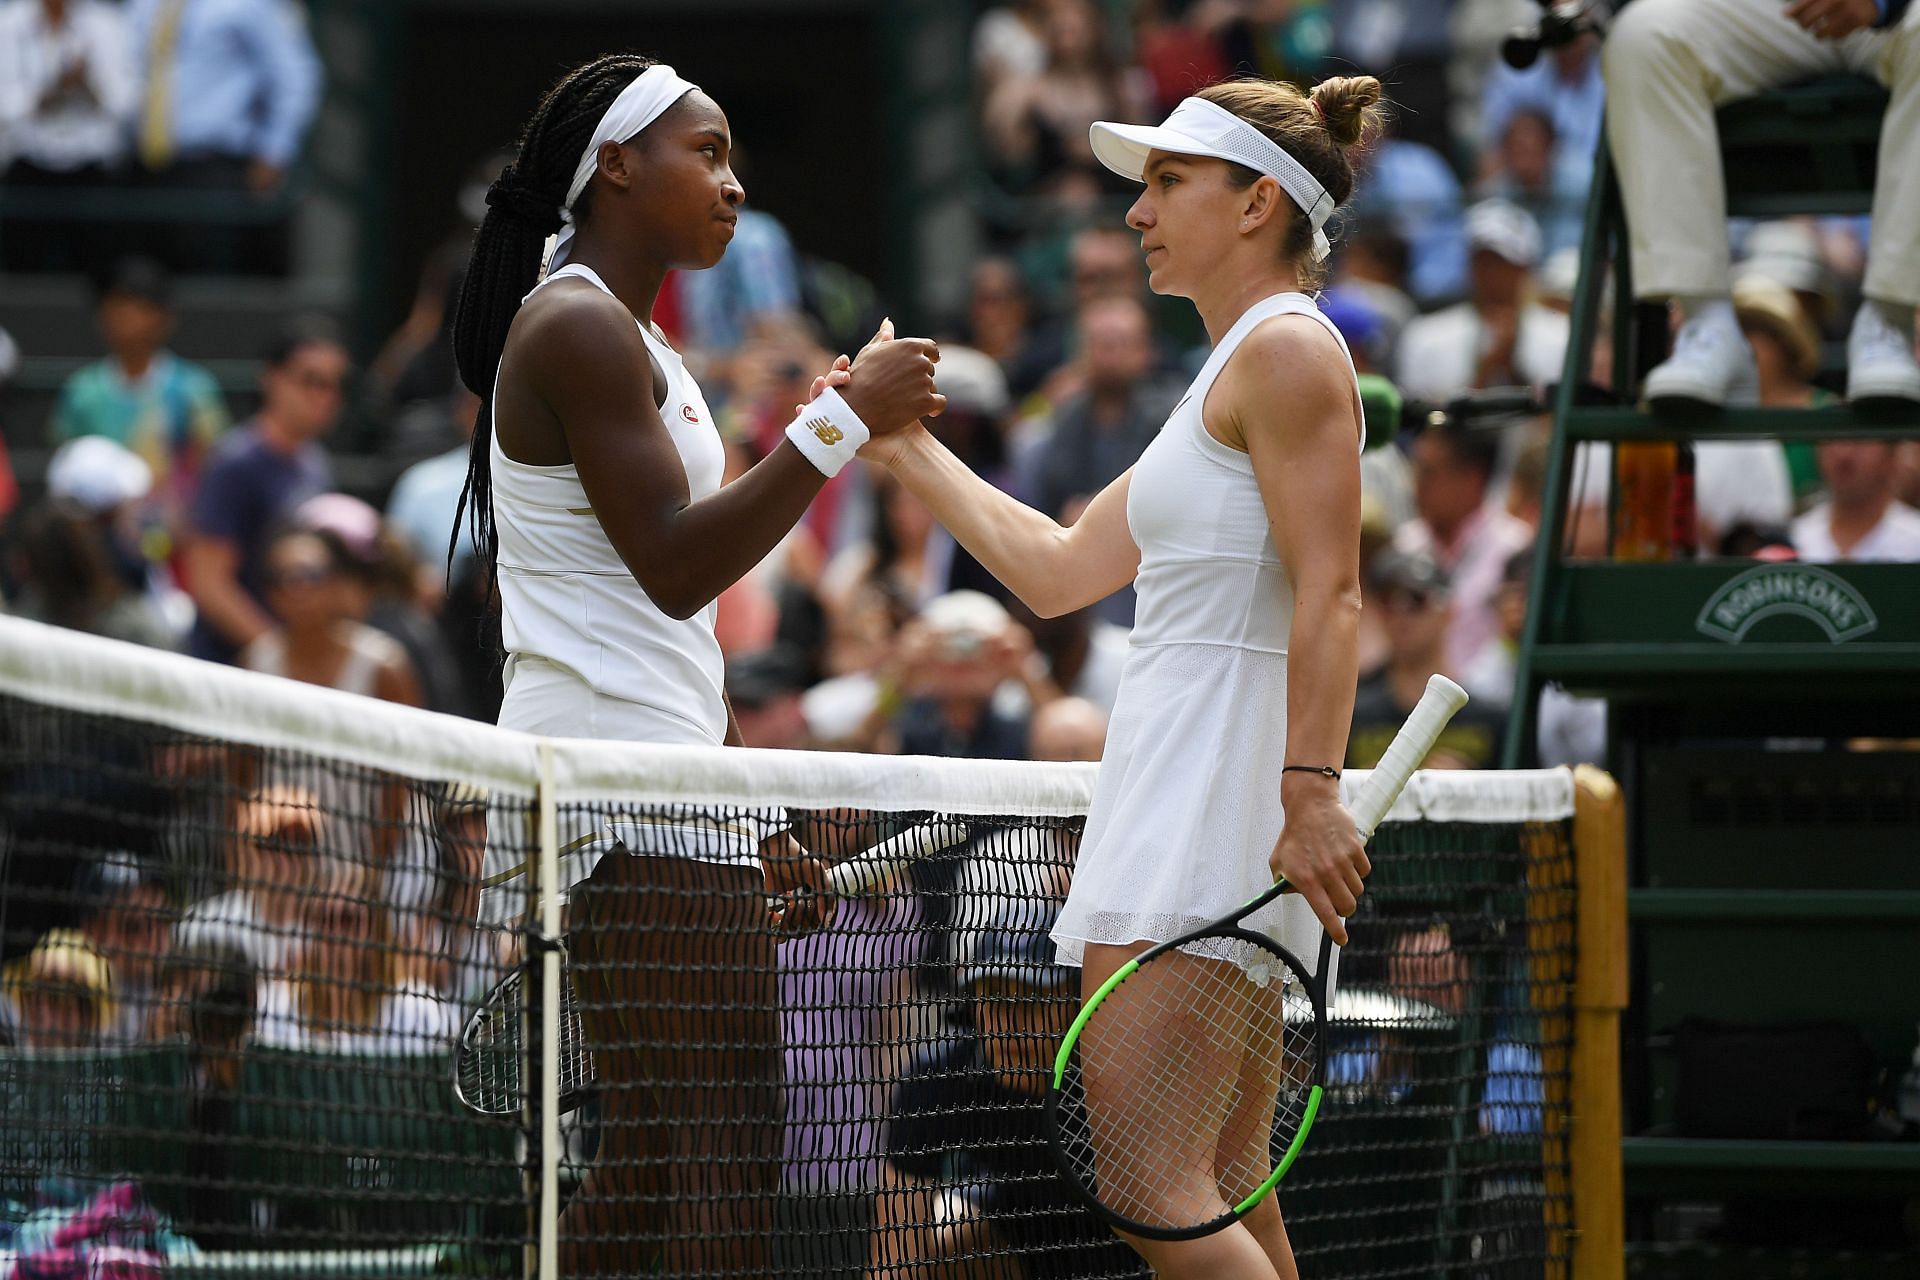 Coco Gauff lost to Simona Halep in the fourth round at Wimbledon 2019